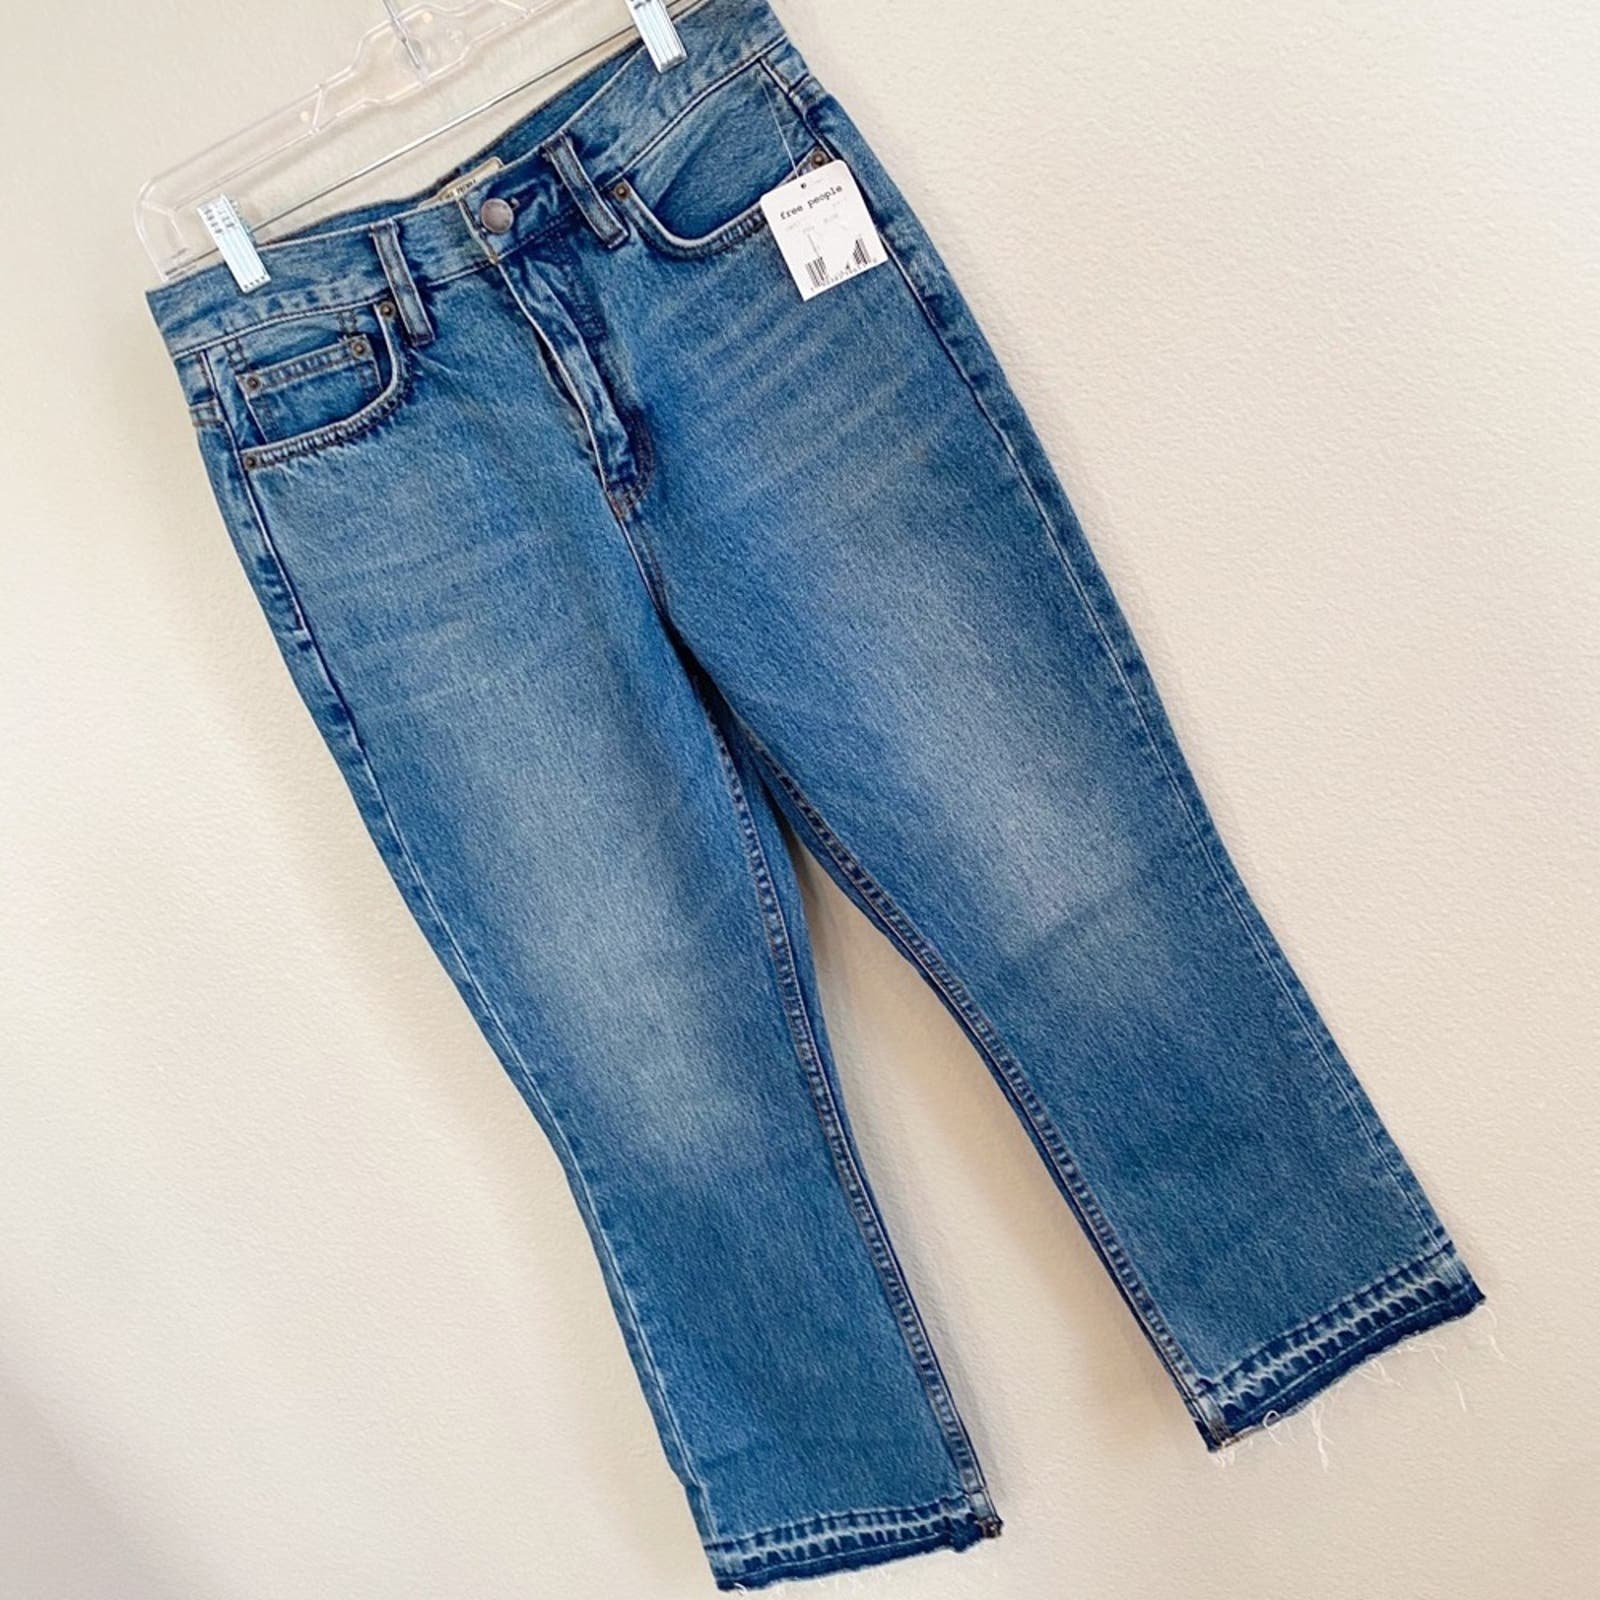 Stylish Free People Cropped Boot Cut Jeans  26 ojudGd9fU Online Shop